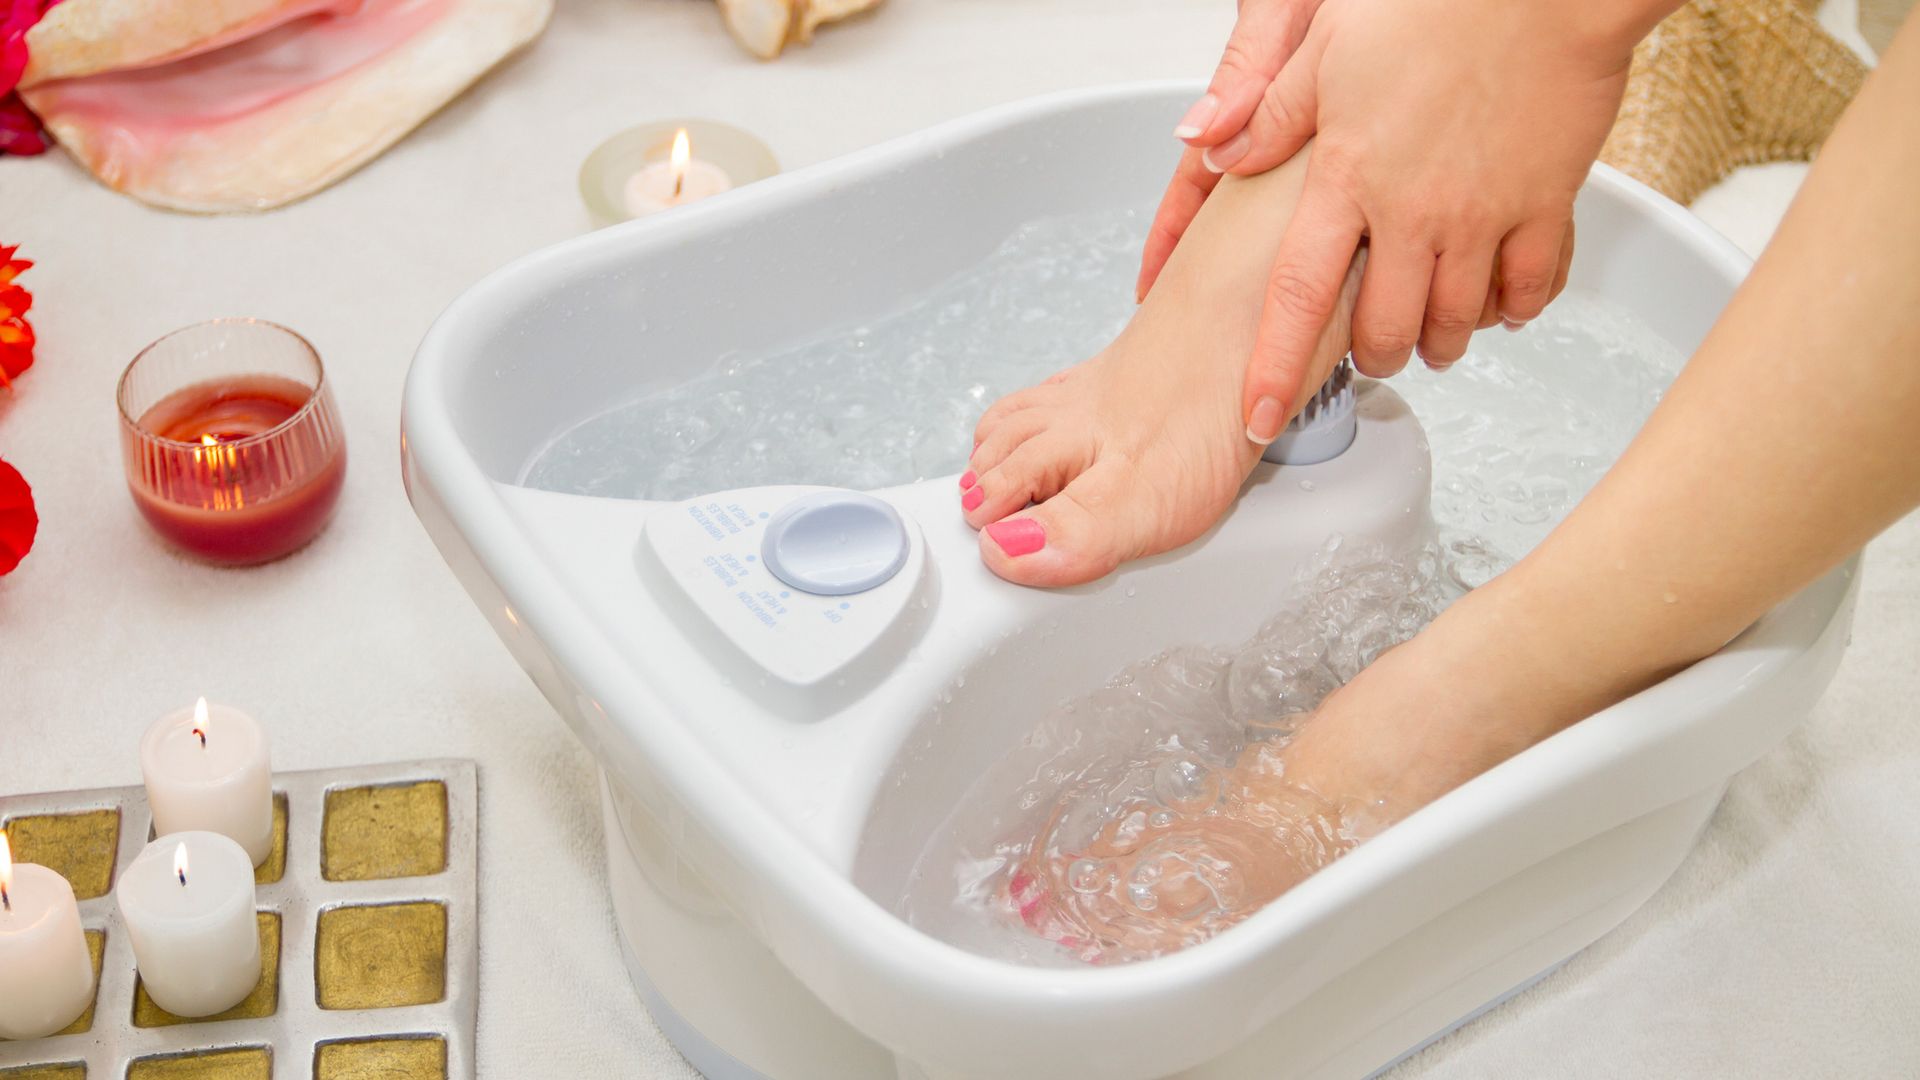 10 best foot spas with top reviews to soothe aching feet